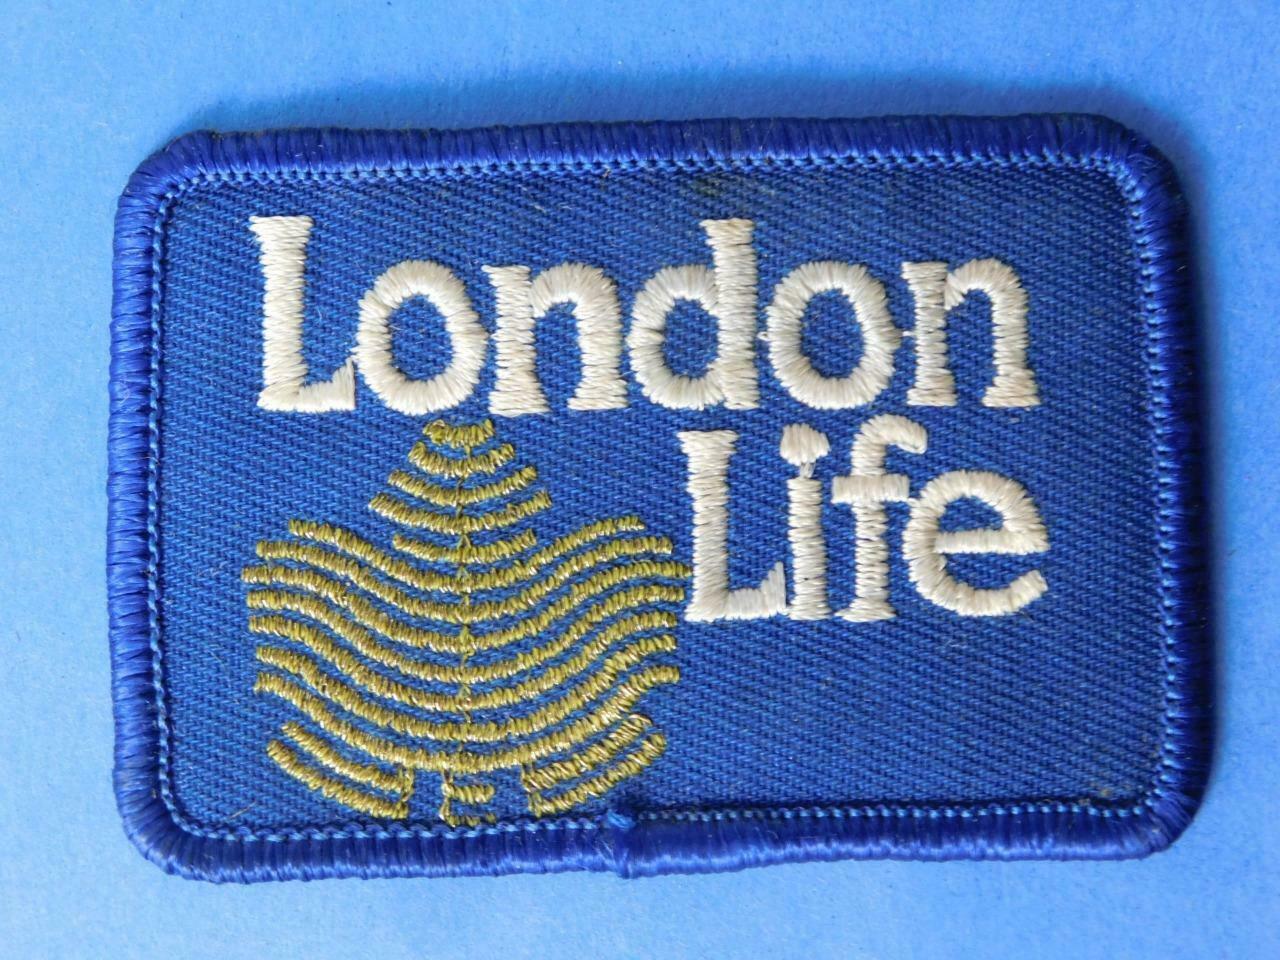 LONDON LIFE INSURANCE COMPANY VINTAGE HAT PATCH BADGE ADVERTISING  CREST